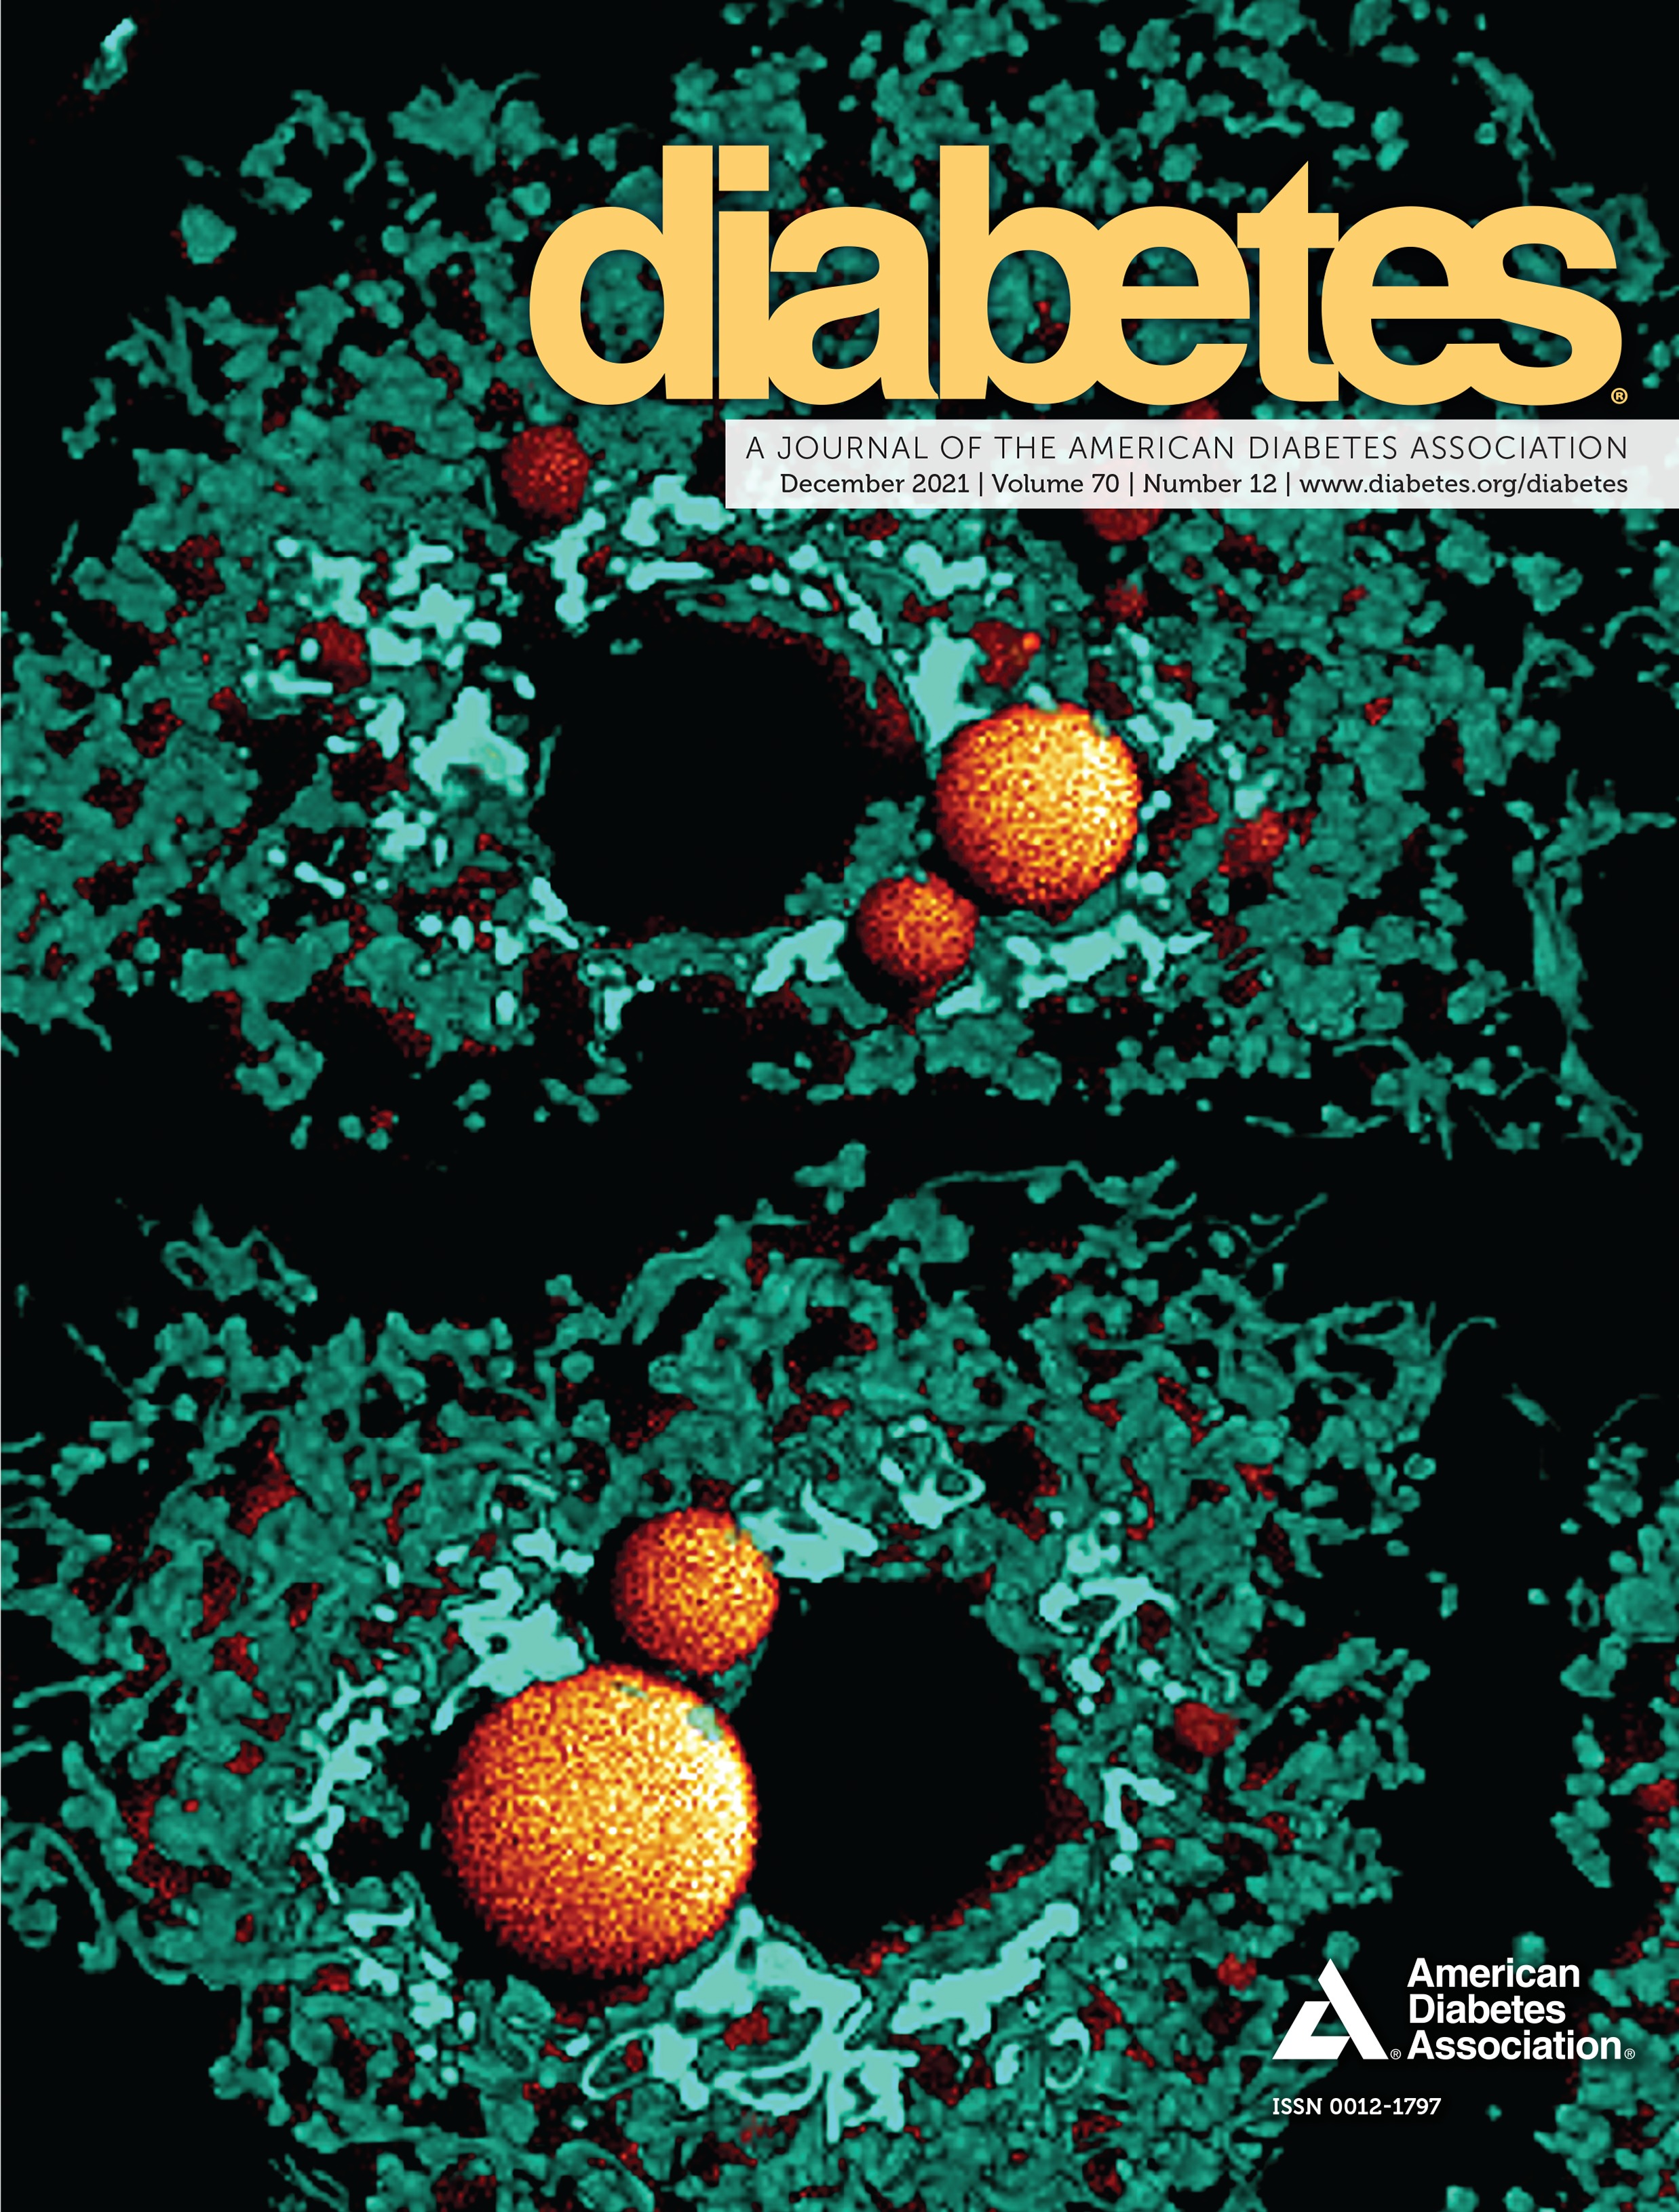 Different Effects of Lifestyle Intervention in High- and Low-Risk Prediabetes: Results of the Randomized Controlled Prediabetes Lifestyle Intervention Study (PLIS)